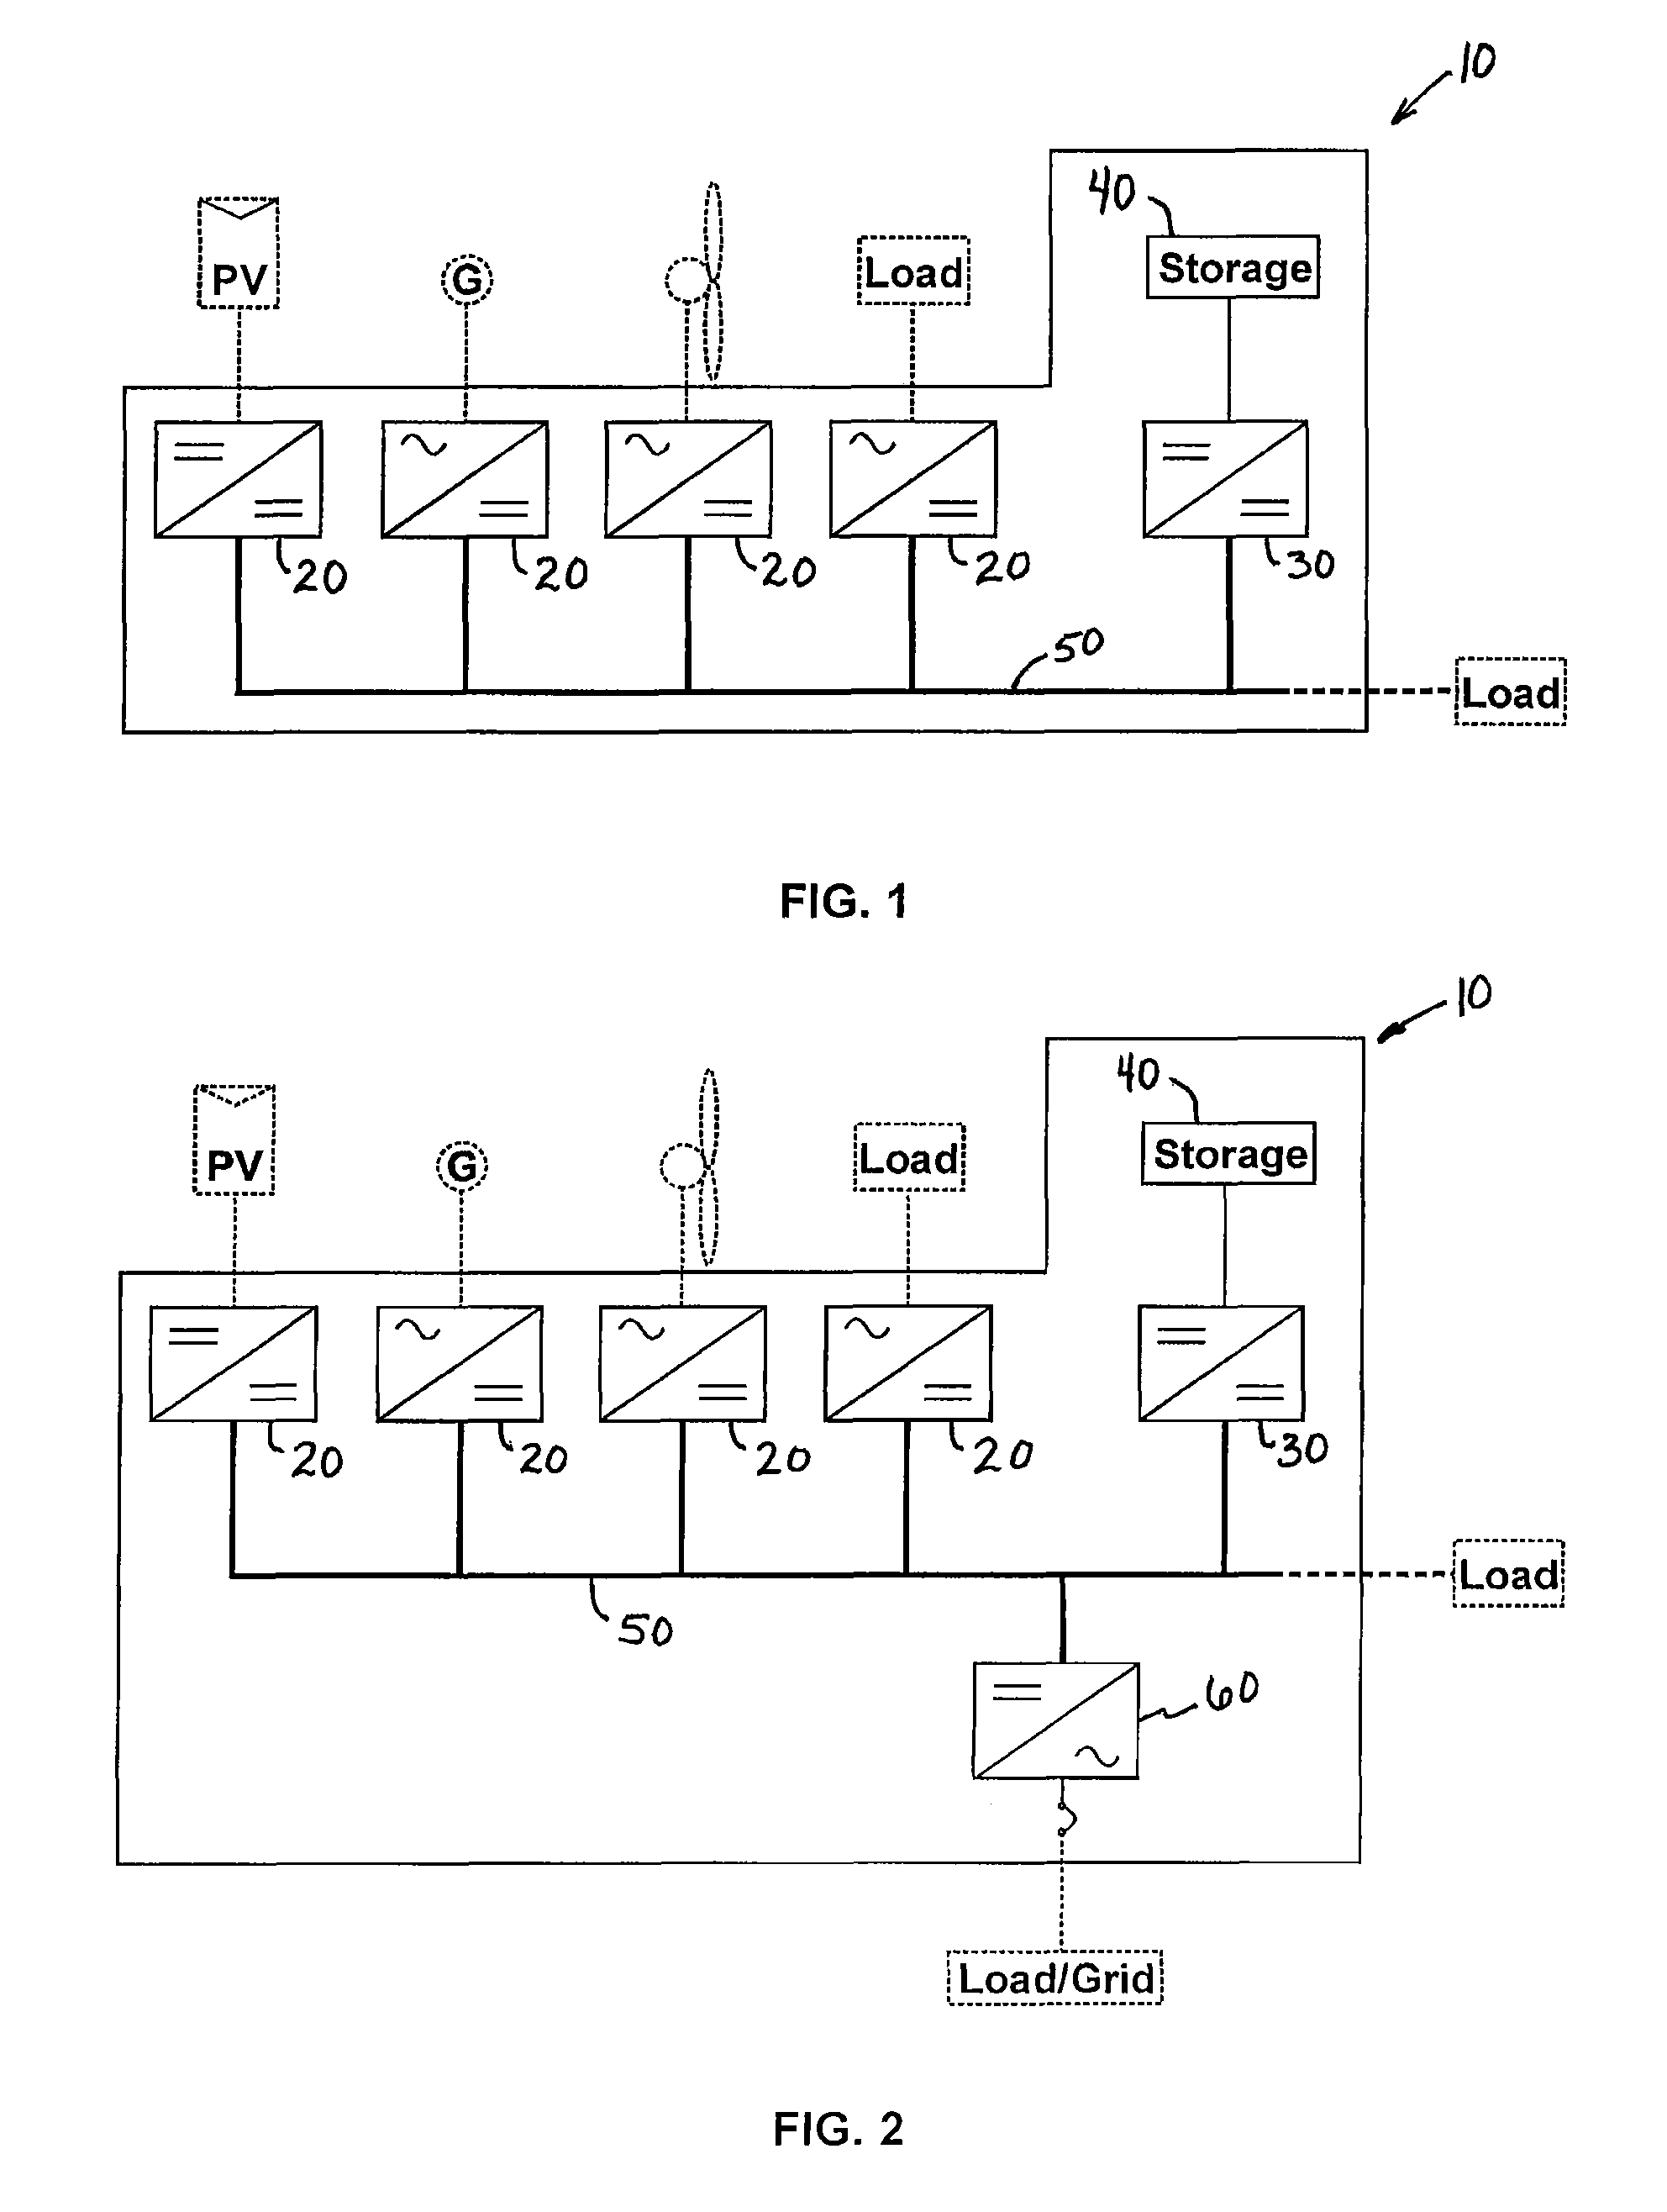 Method and apparatus for controlling a hybrid power system